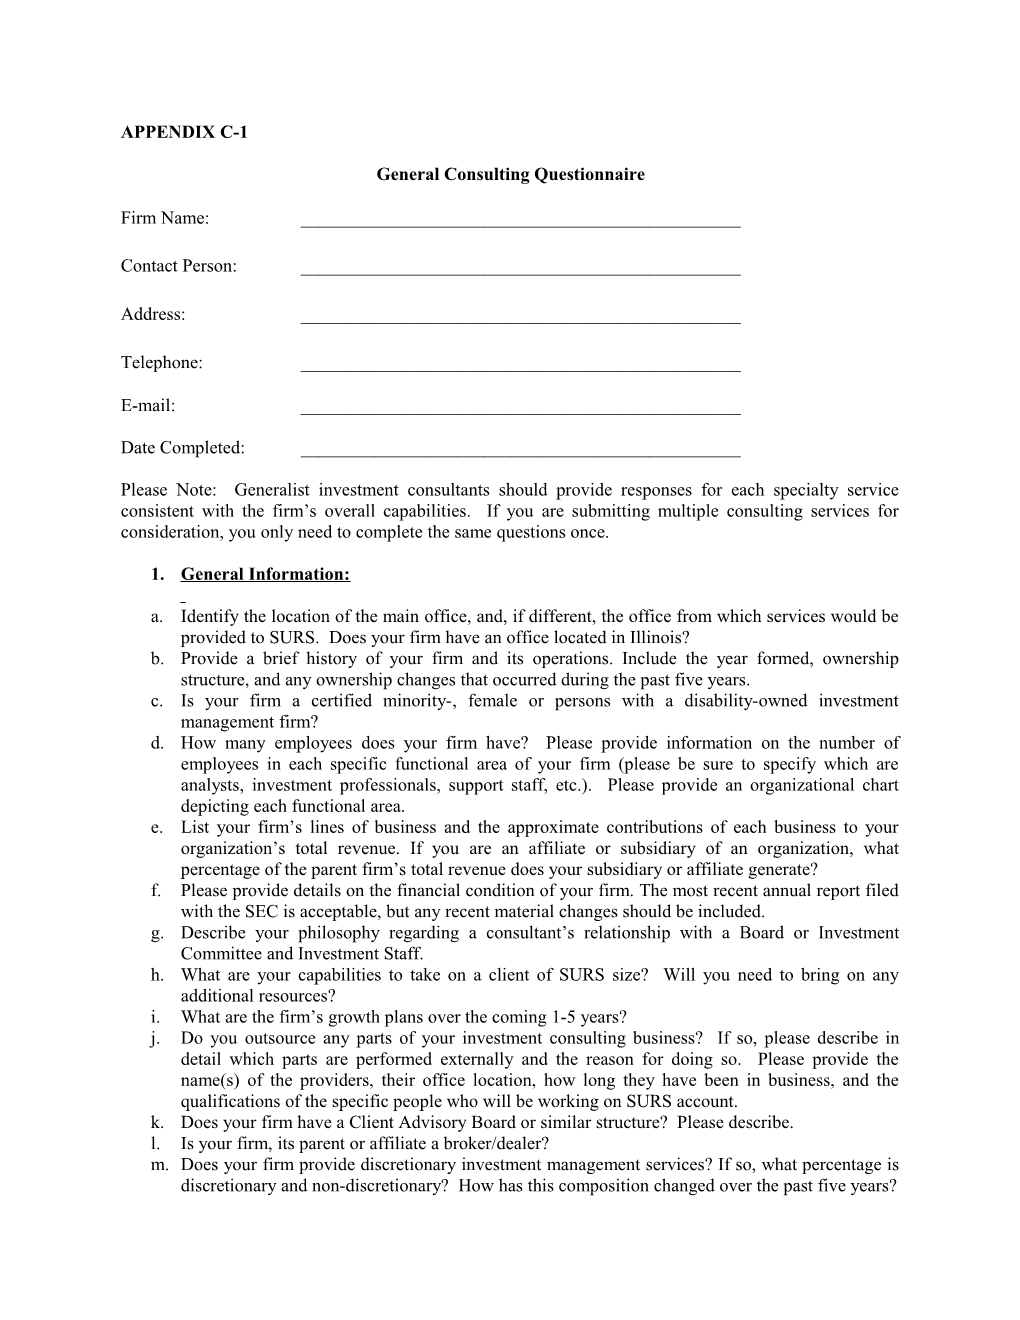 General Consulting Questionnaire